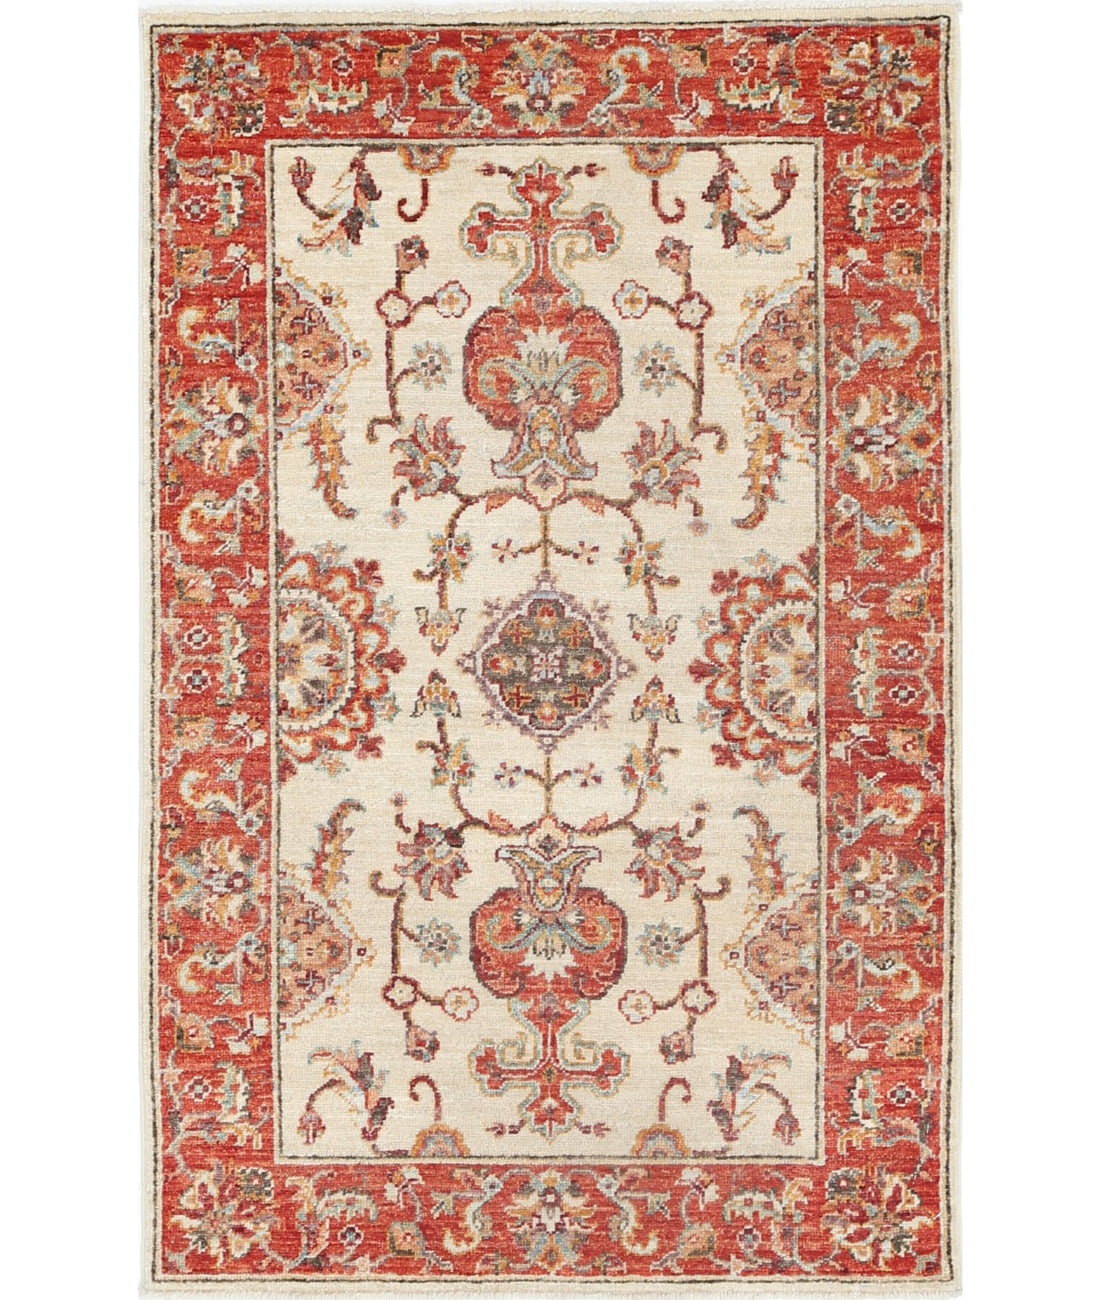 Ziegler 2'6'' X 4'0'' Hand-Knotted Wool Rug 2'6'' x 4'0'' (75 X 120) / Ivory / Red